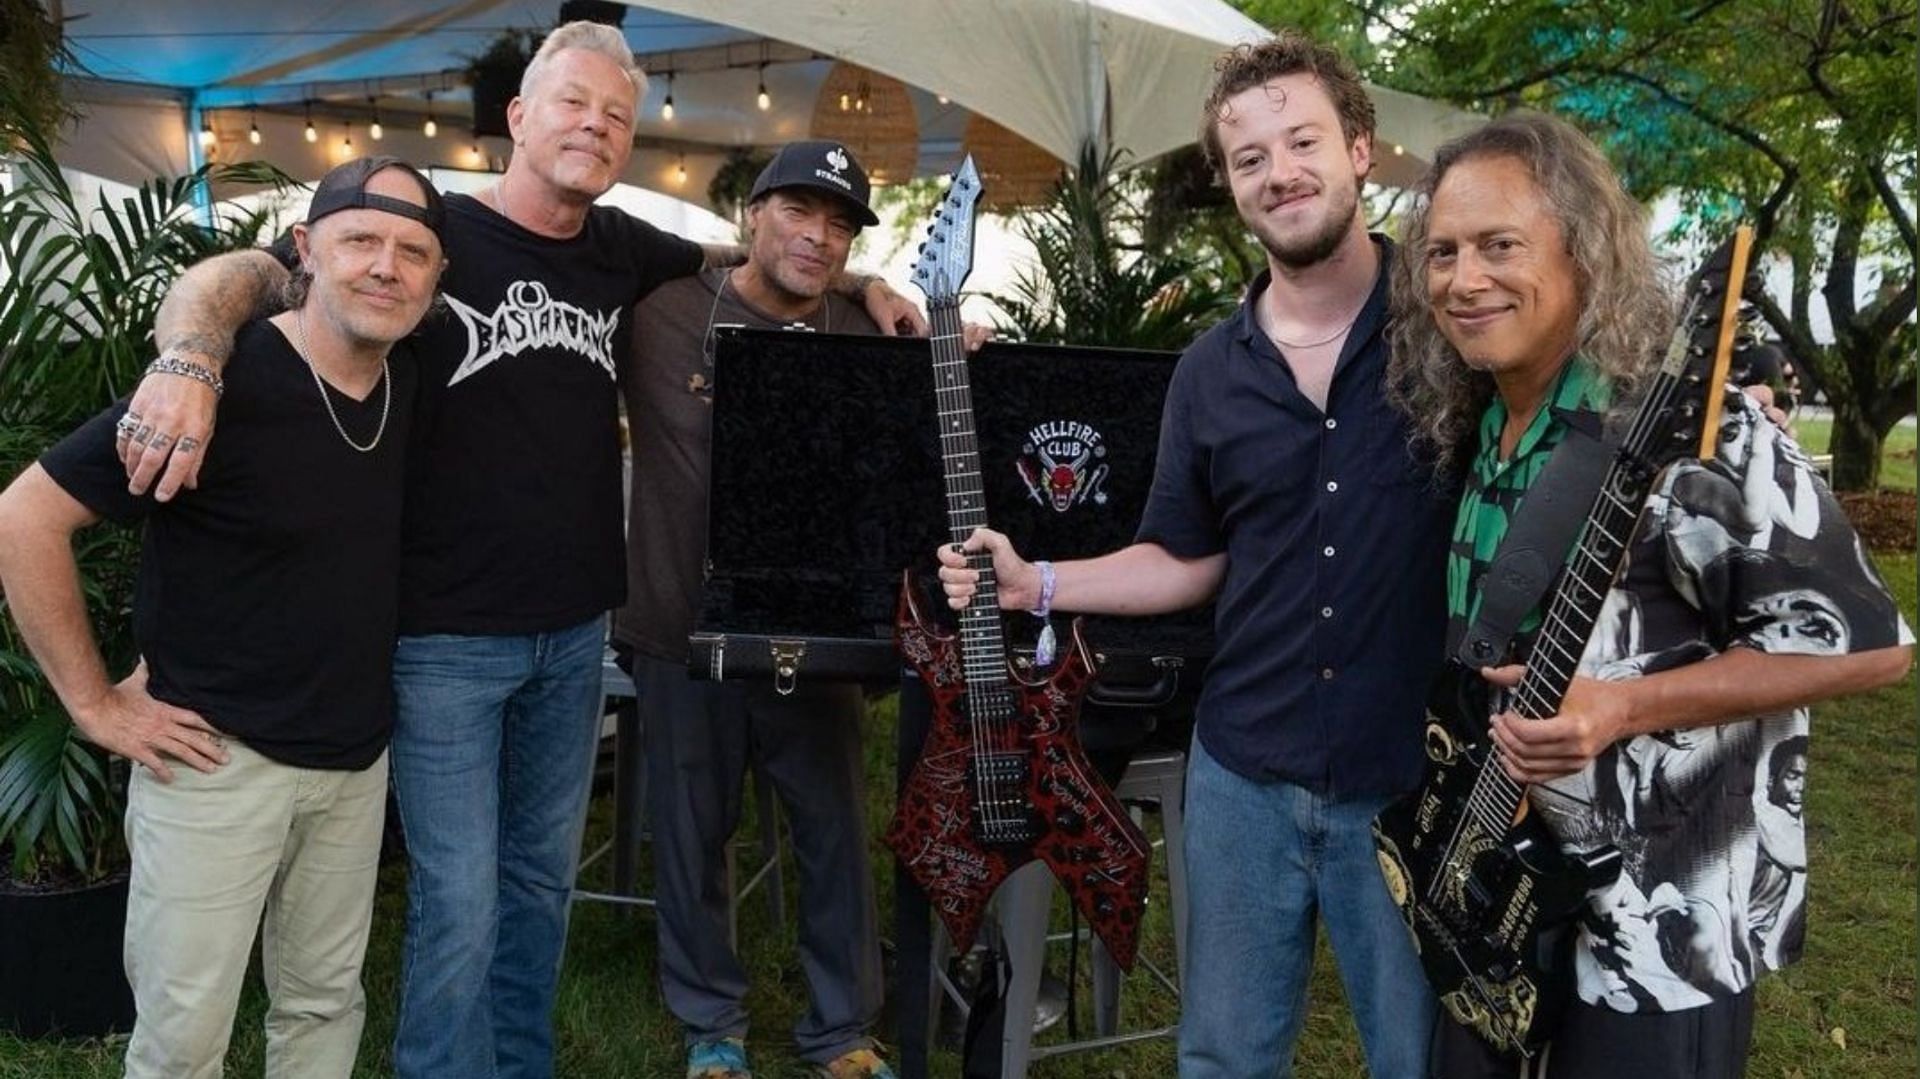 Joseph Quinn collaborated with Metallica during Lollapalooza festival. (Image via Twitter / @xvperrieres)